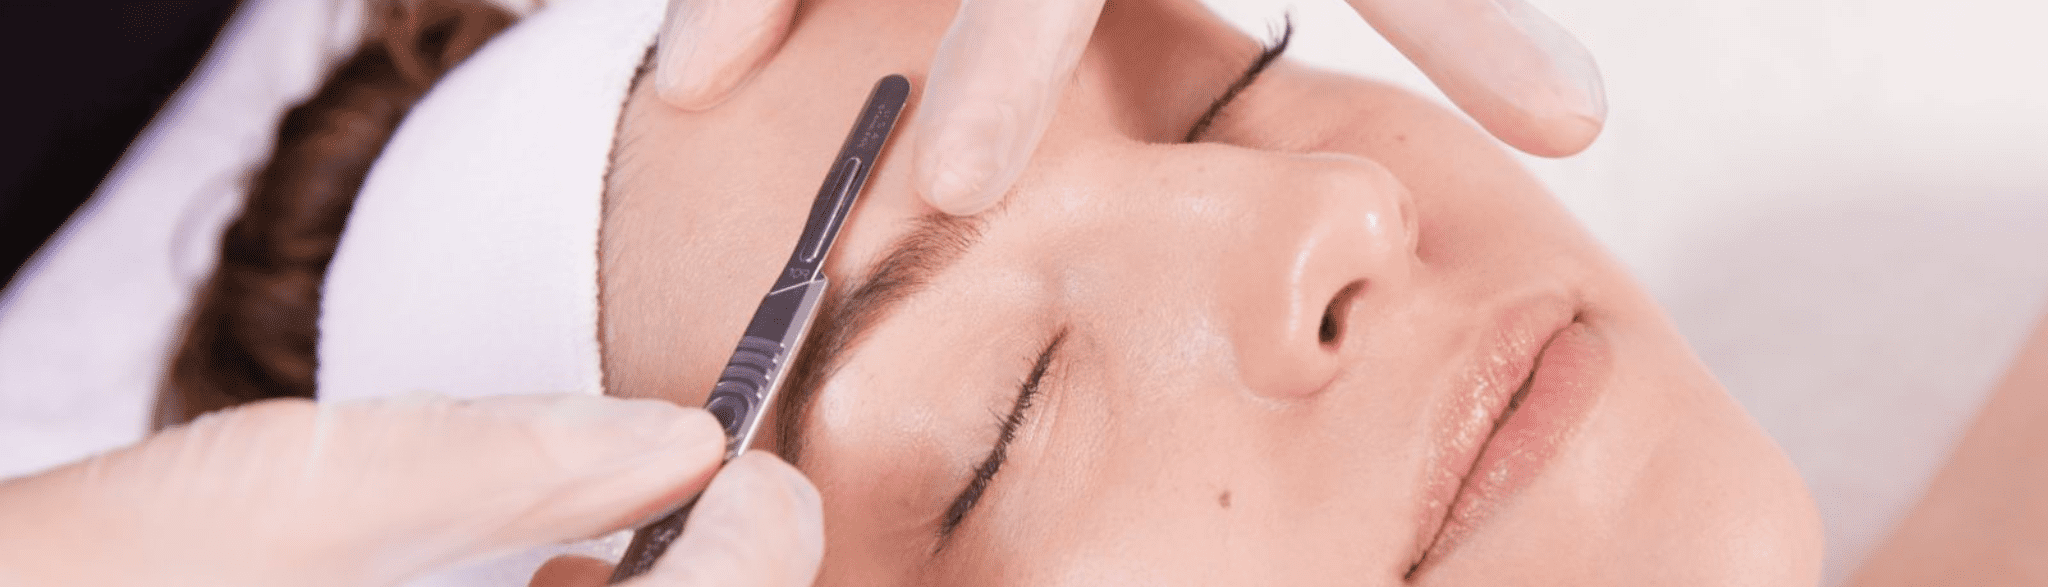 Dermaplaning being performed on woman